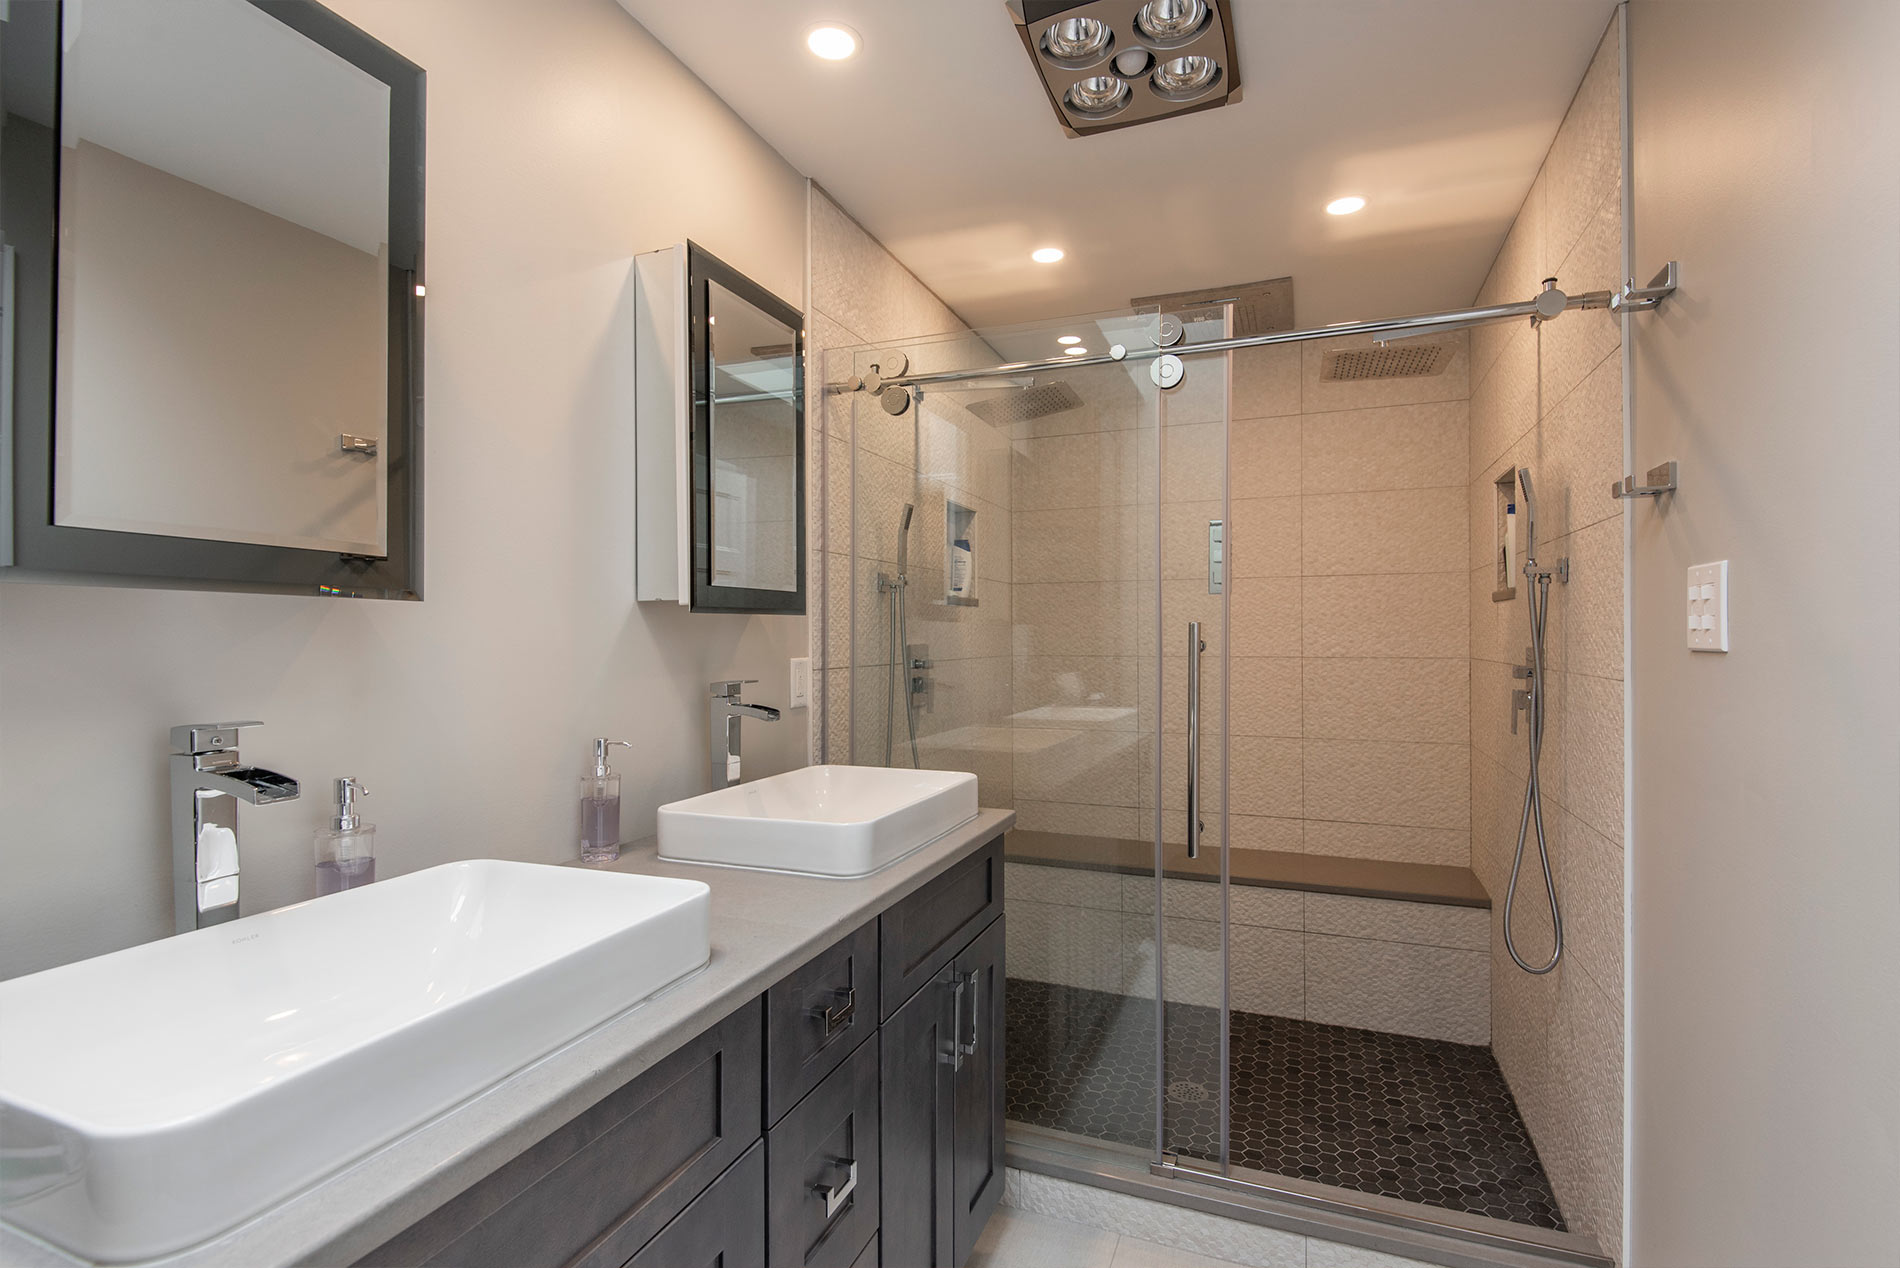 Bathroom Remodeling Guide: Essential Steps for Every Homeowner in Pennsylvania